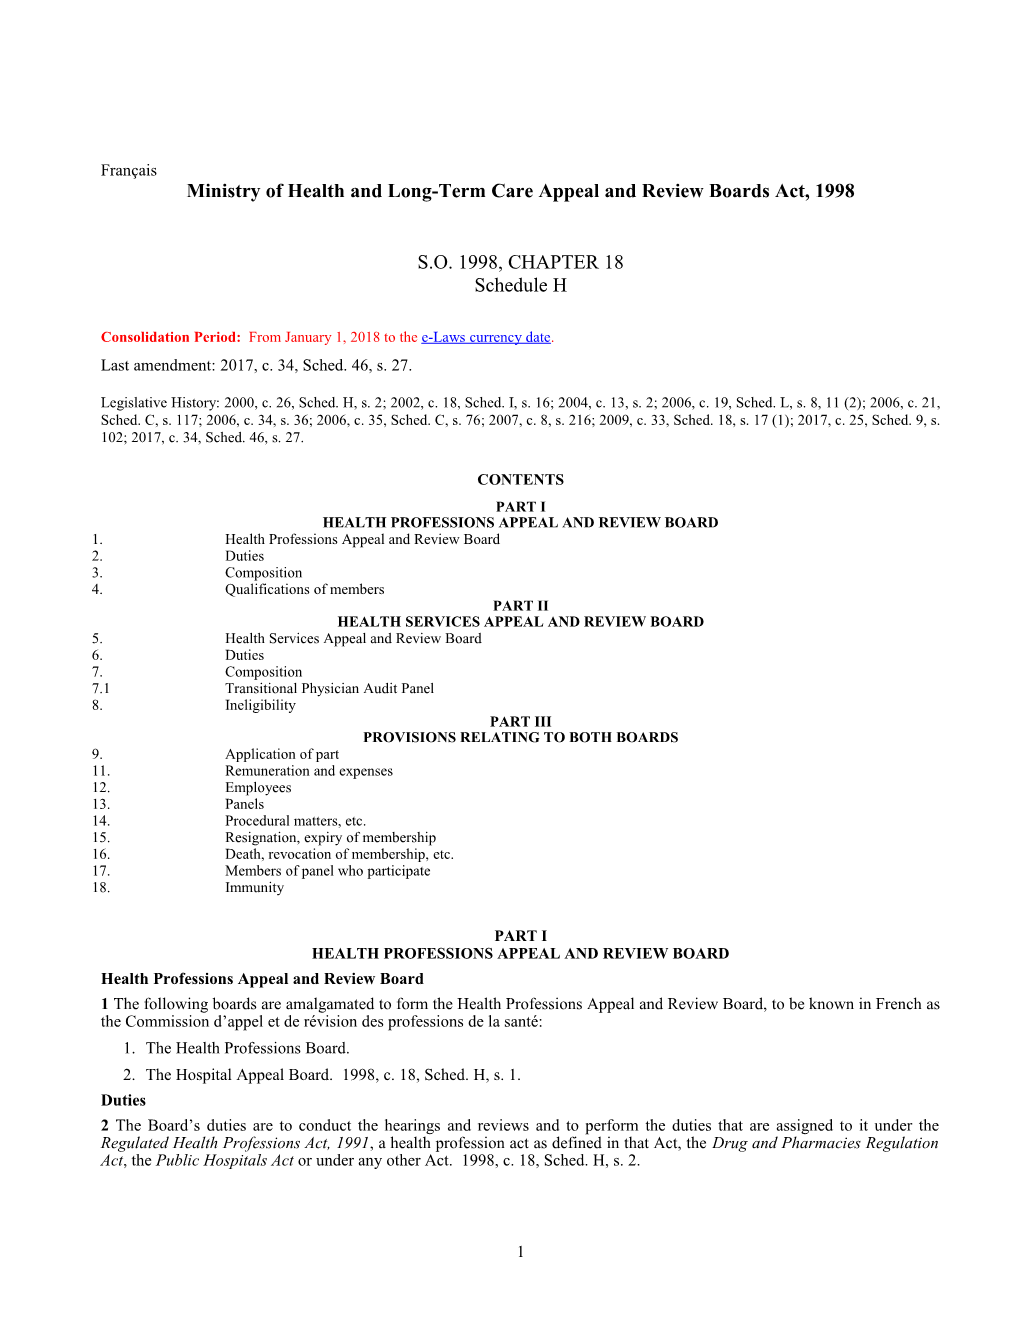 Ministry of Health and Long-Term Care Appeal and Review Boards Act, 1998, S.O. 1998, C